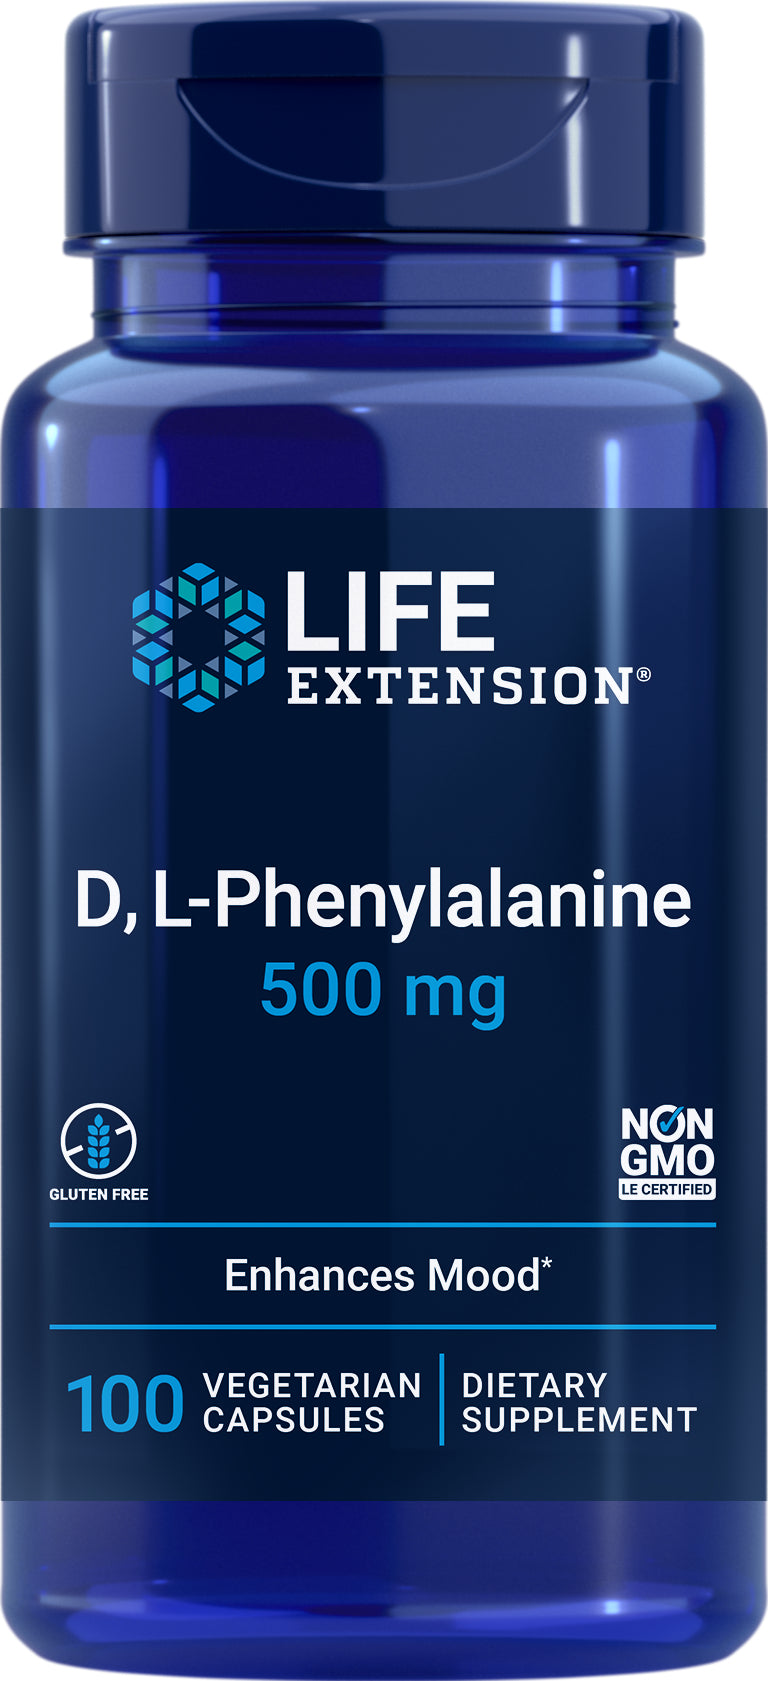 D, L-Phenylalanine Capsules 1000 mg, 100 veg caps by Life Extension